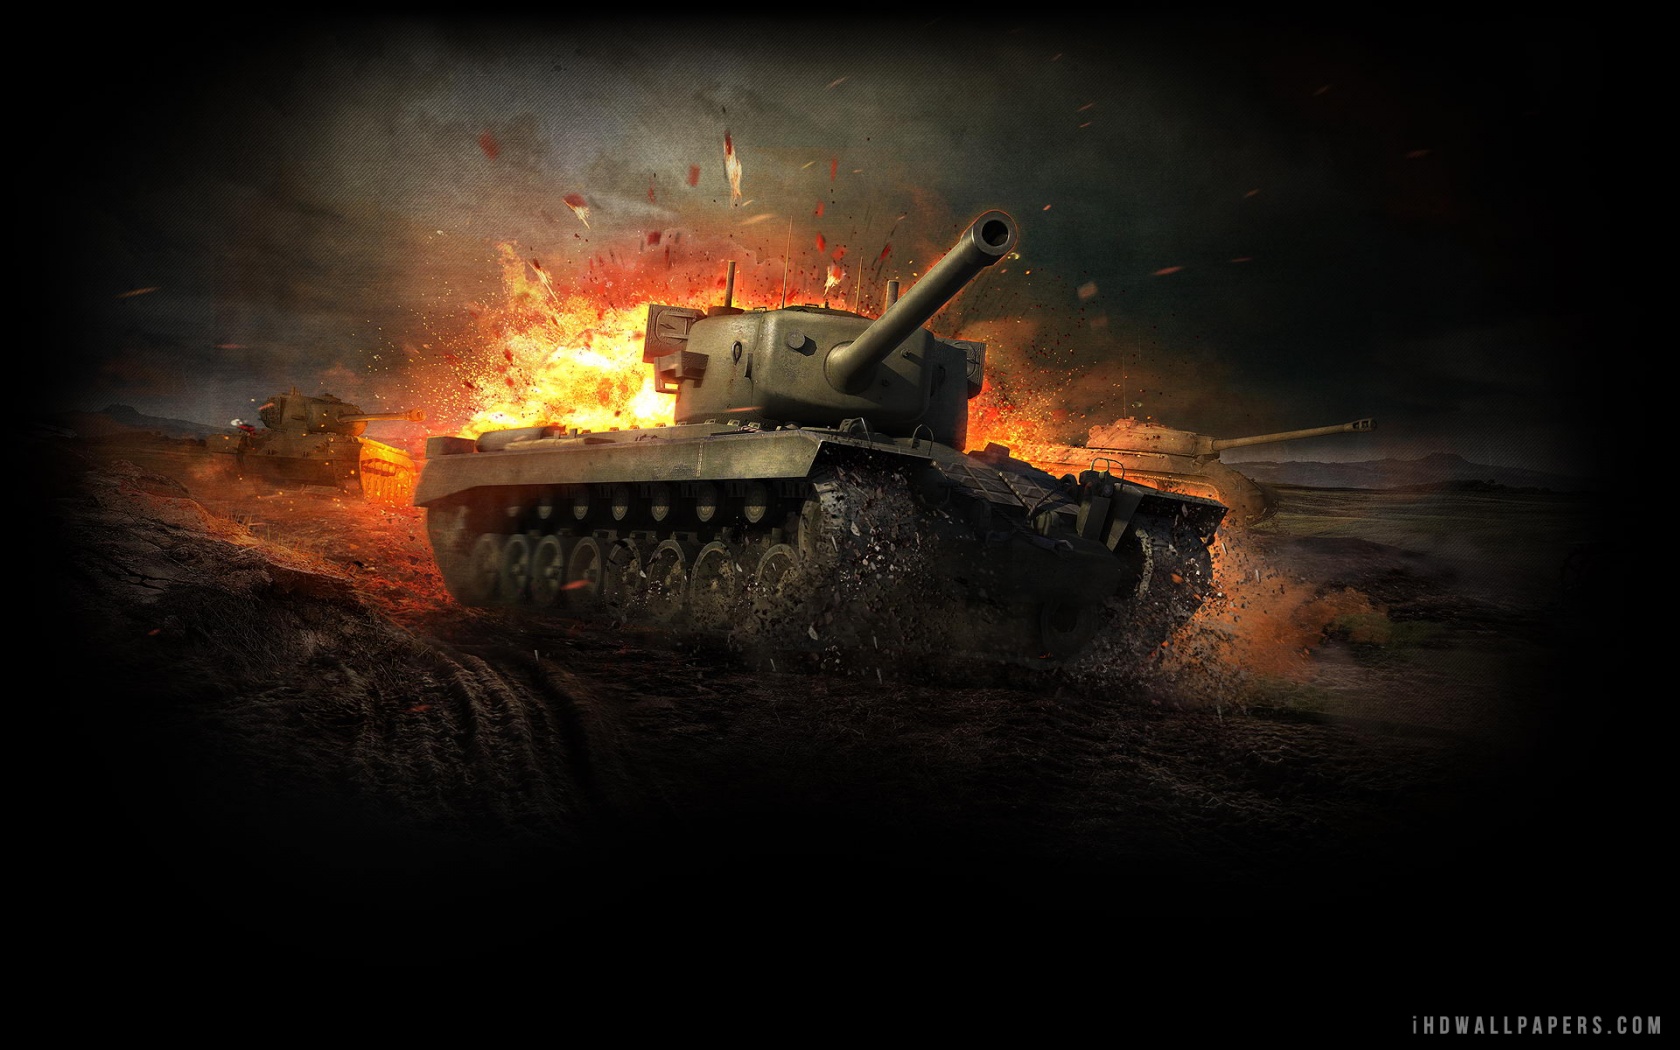  Download World Of Tanks 6 WallpaperBackground in 1680x1050